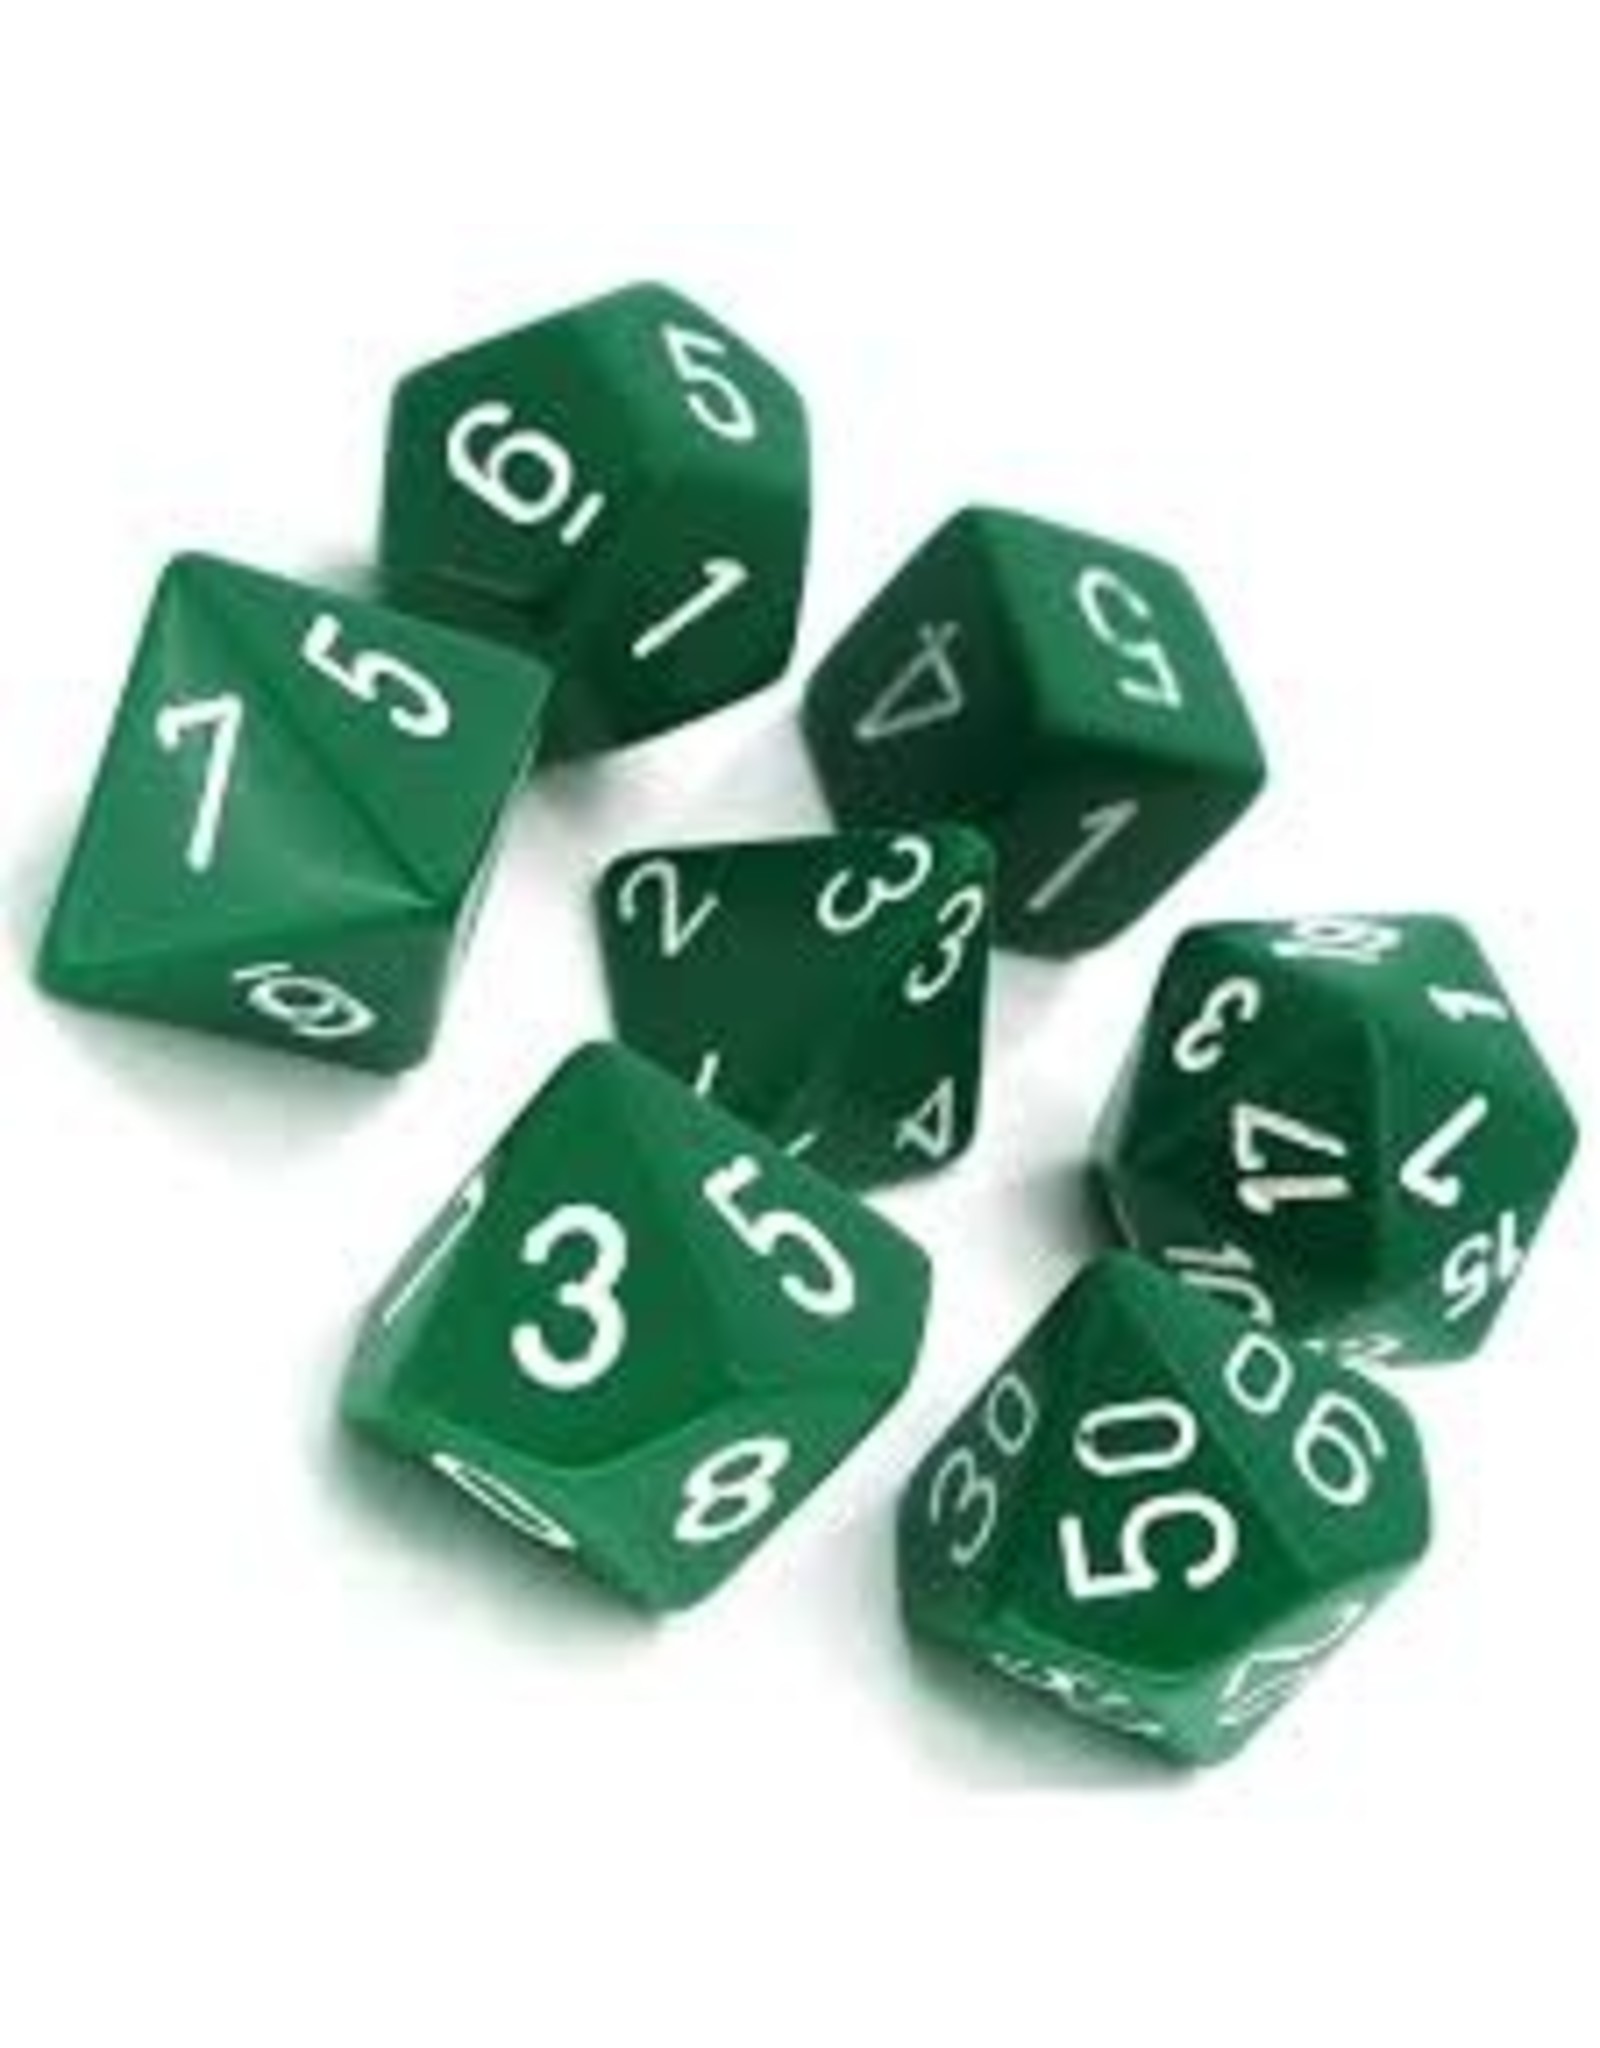 Chessex 7-Set Polyhedral Opaque: Green With White